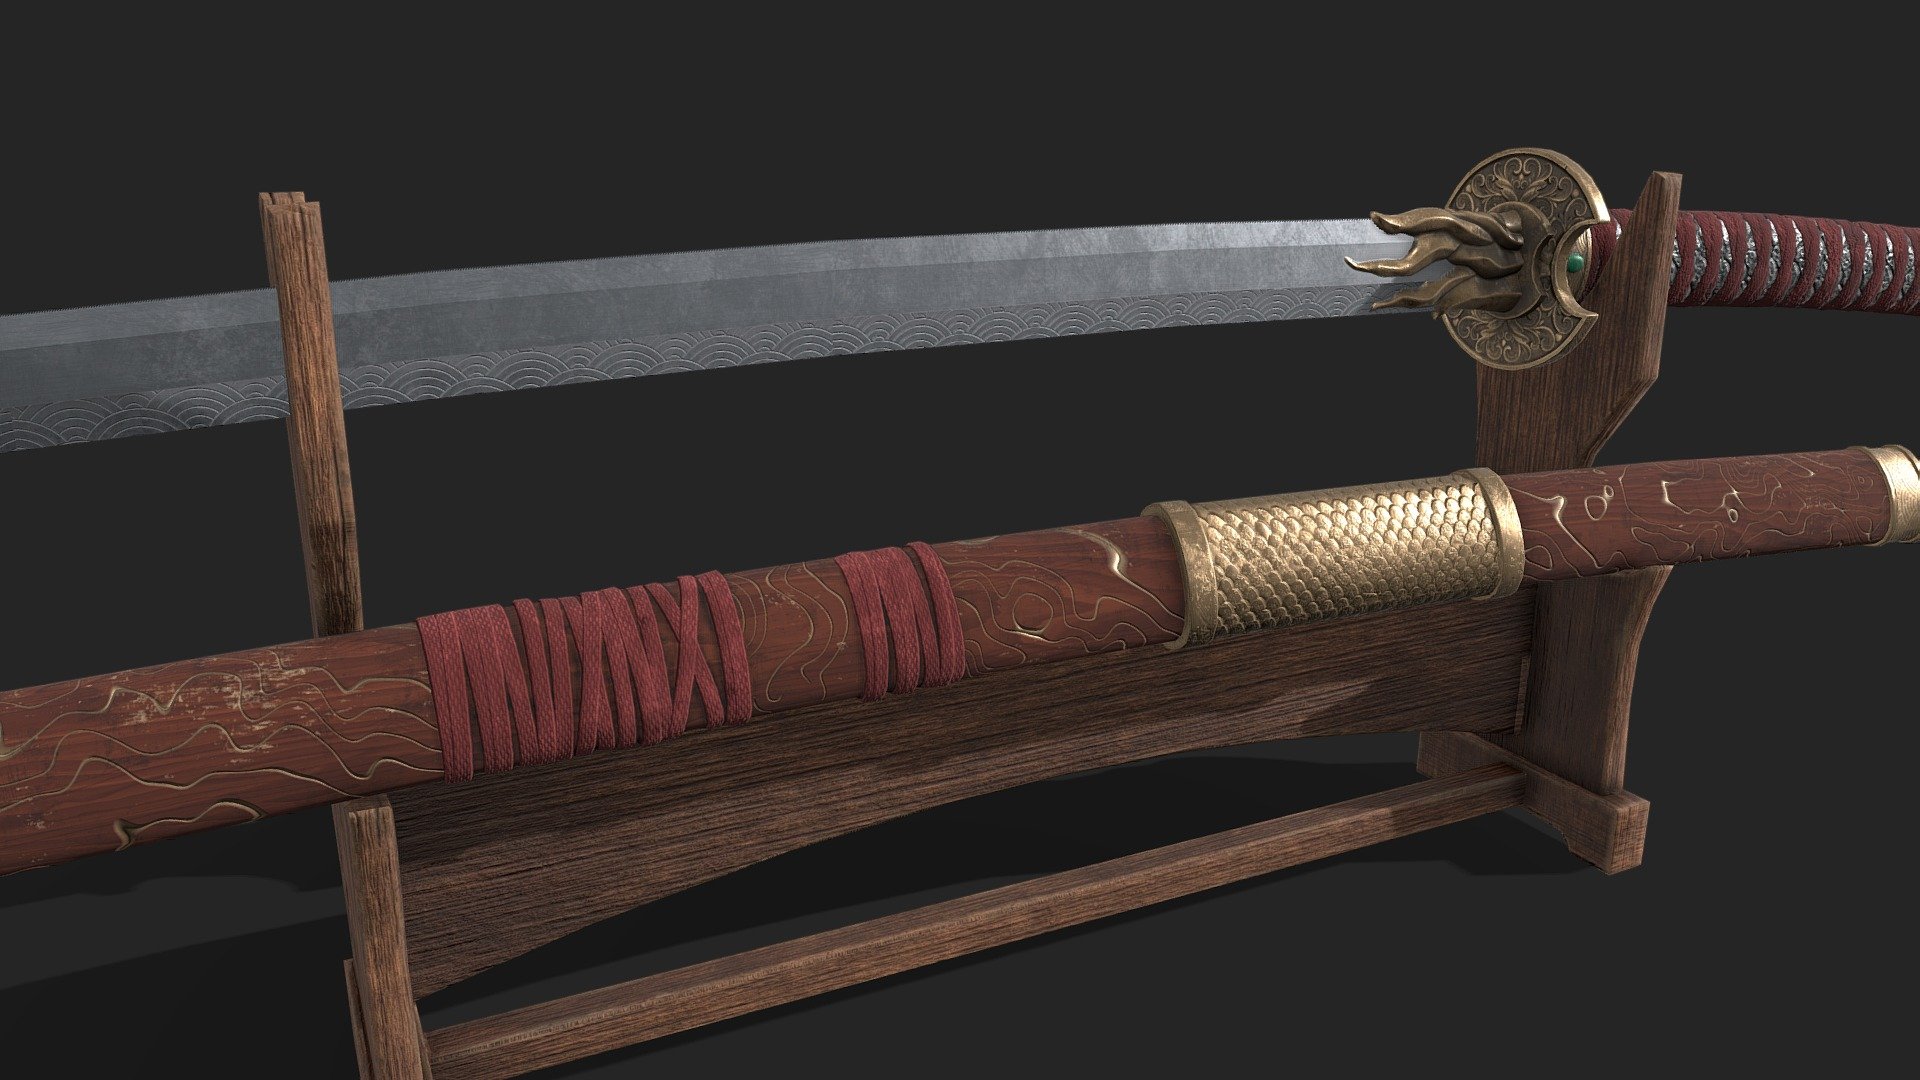 Katana 

Sword - 4096 Texture and 4 382 Tris.

Scabbard - 4096 Texture and 2 548 Tris.

Stand Base - - 2048 Texture and 678 Tris.

Textures include:

-Base Color

-Normal

-Roughness

-Metallic

-AO

I hope you like it 3d model